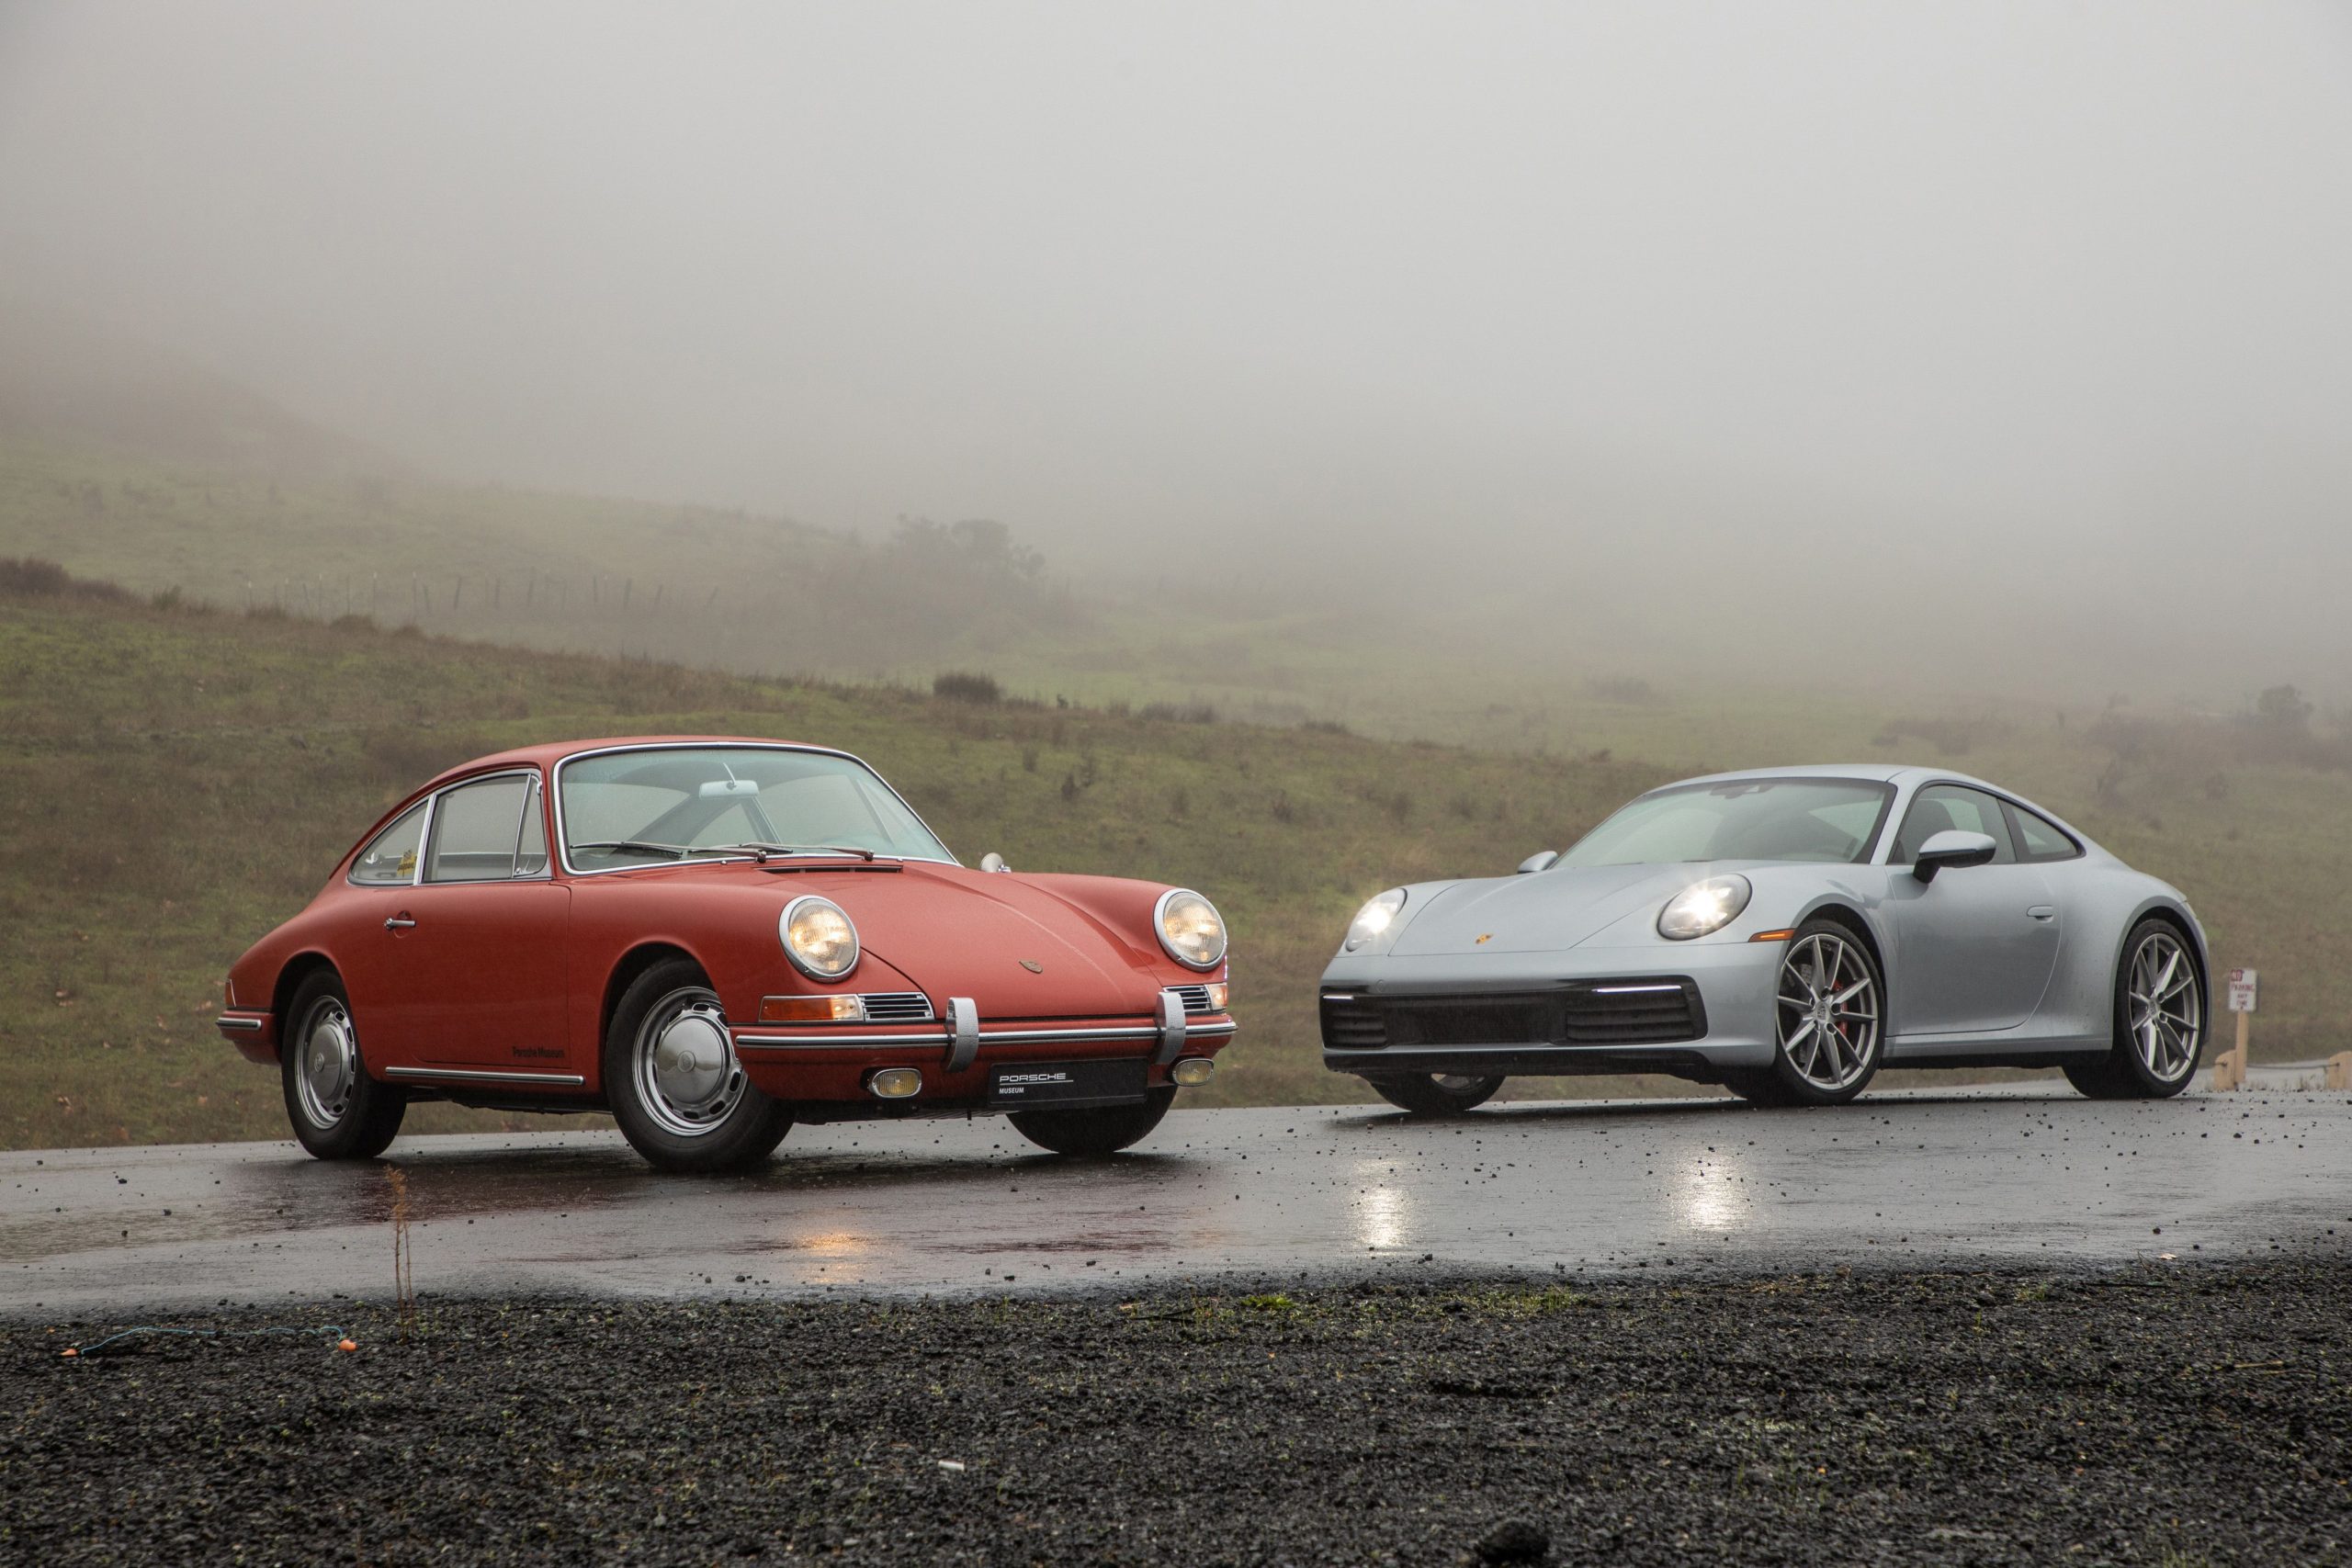 front angled image showing a red 1964 Porsche 901 and a 2020 Porsche 911